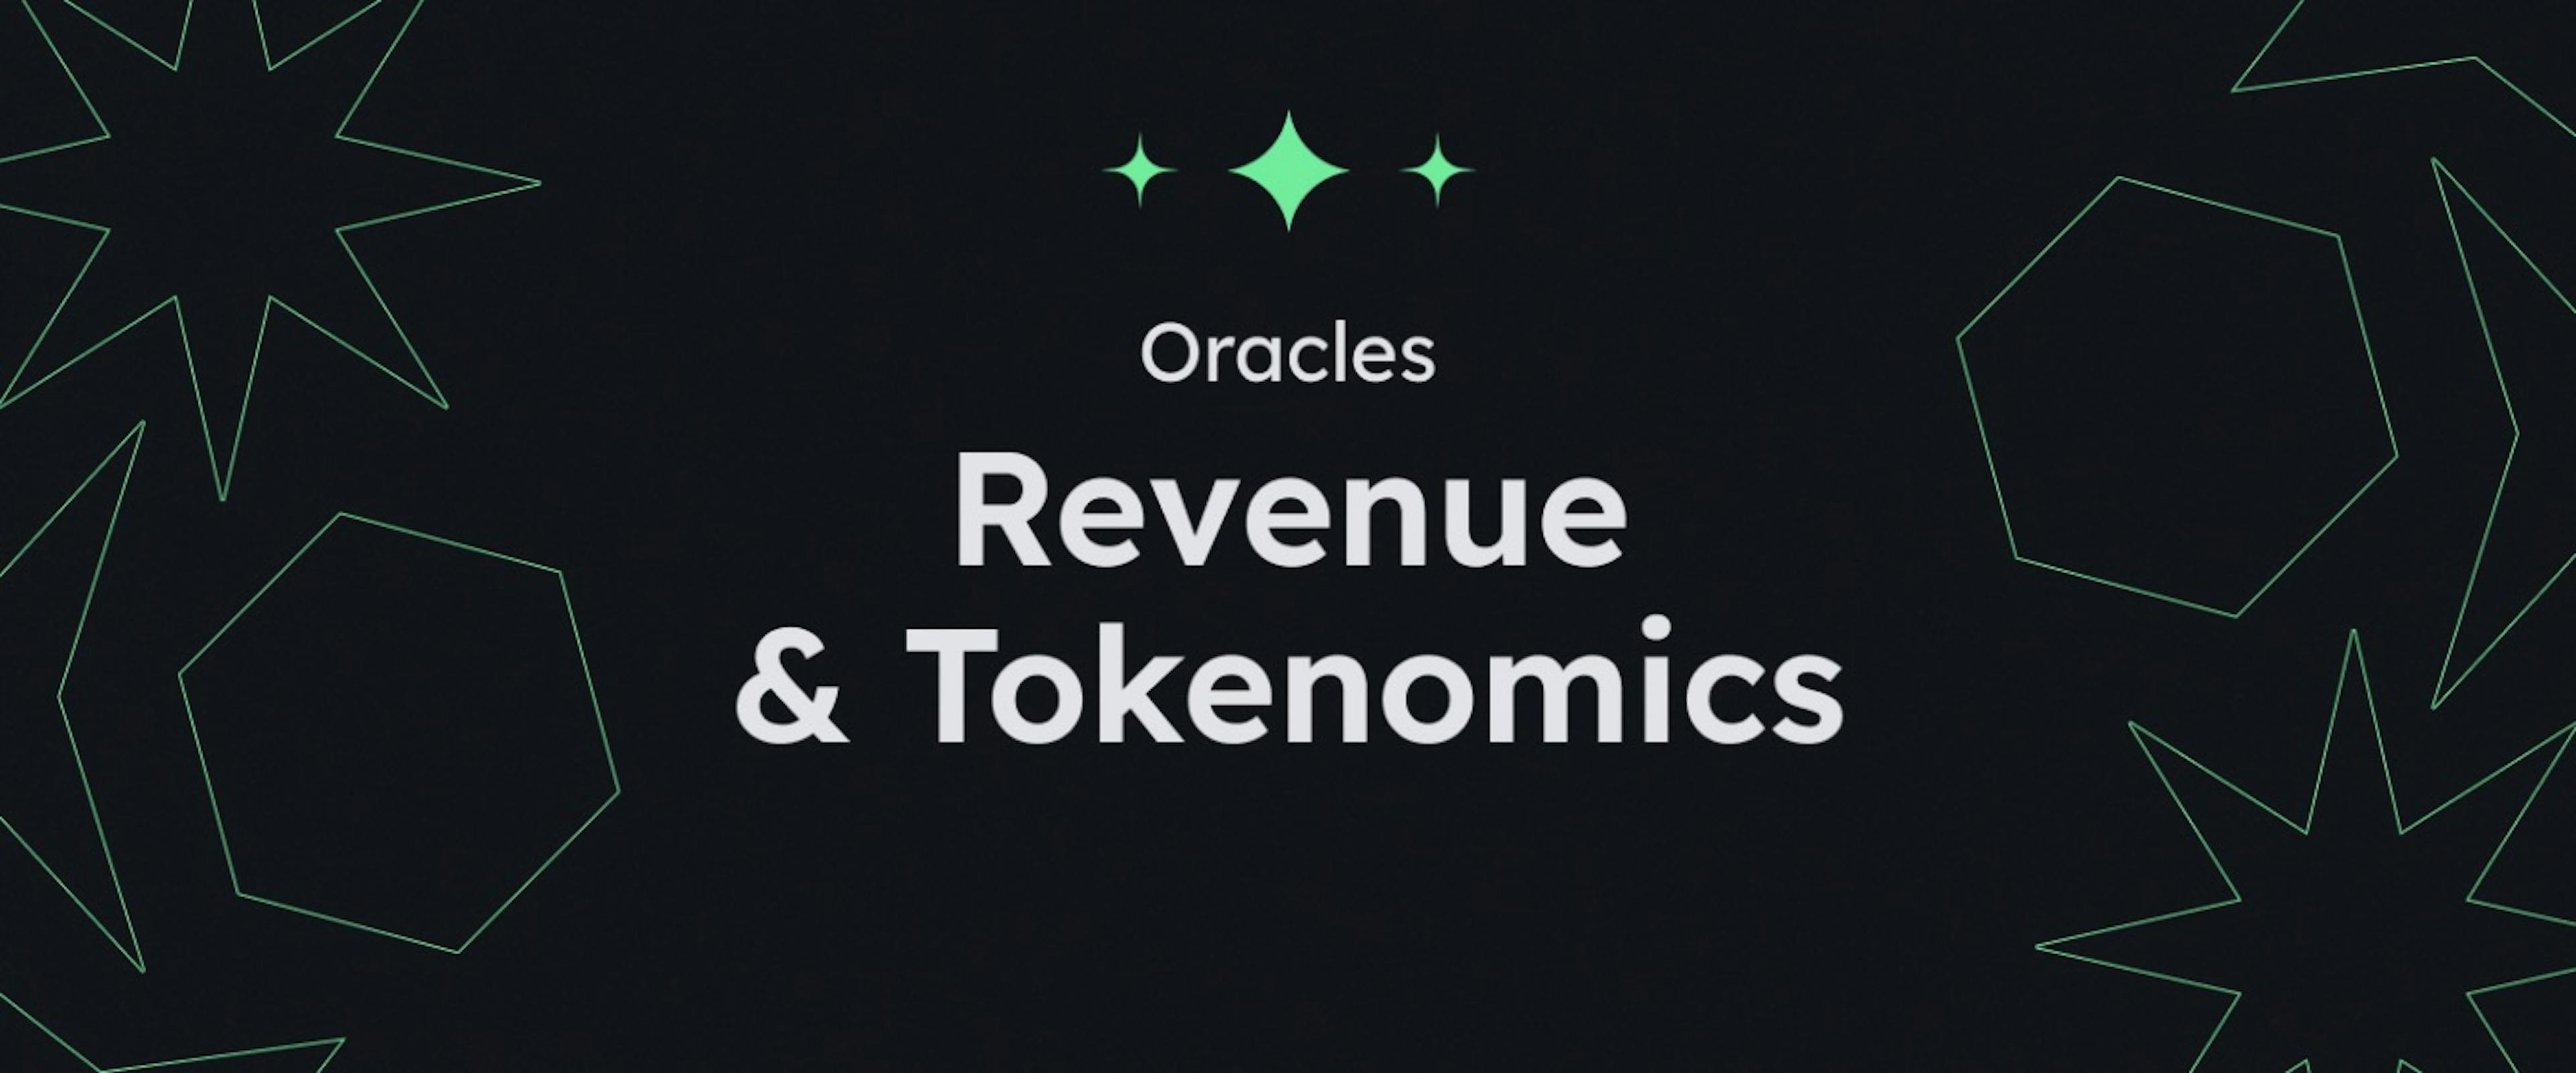 featured image - Oracles: Doanh thu và Tokenomics